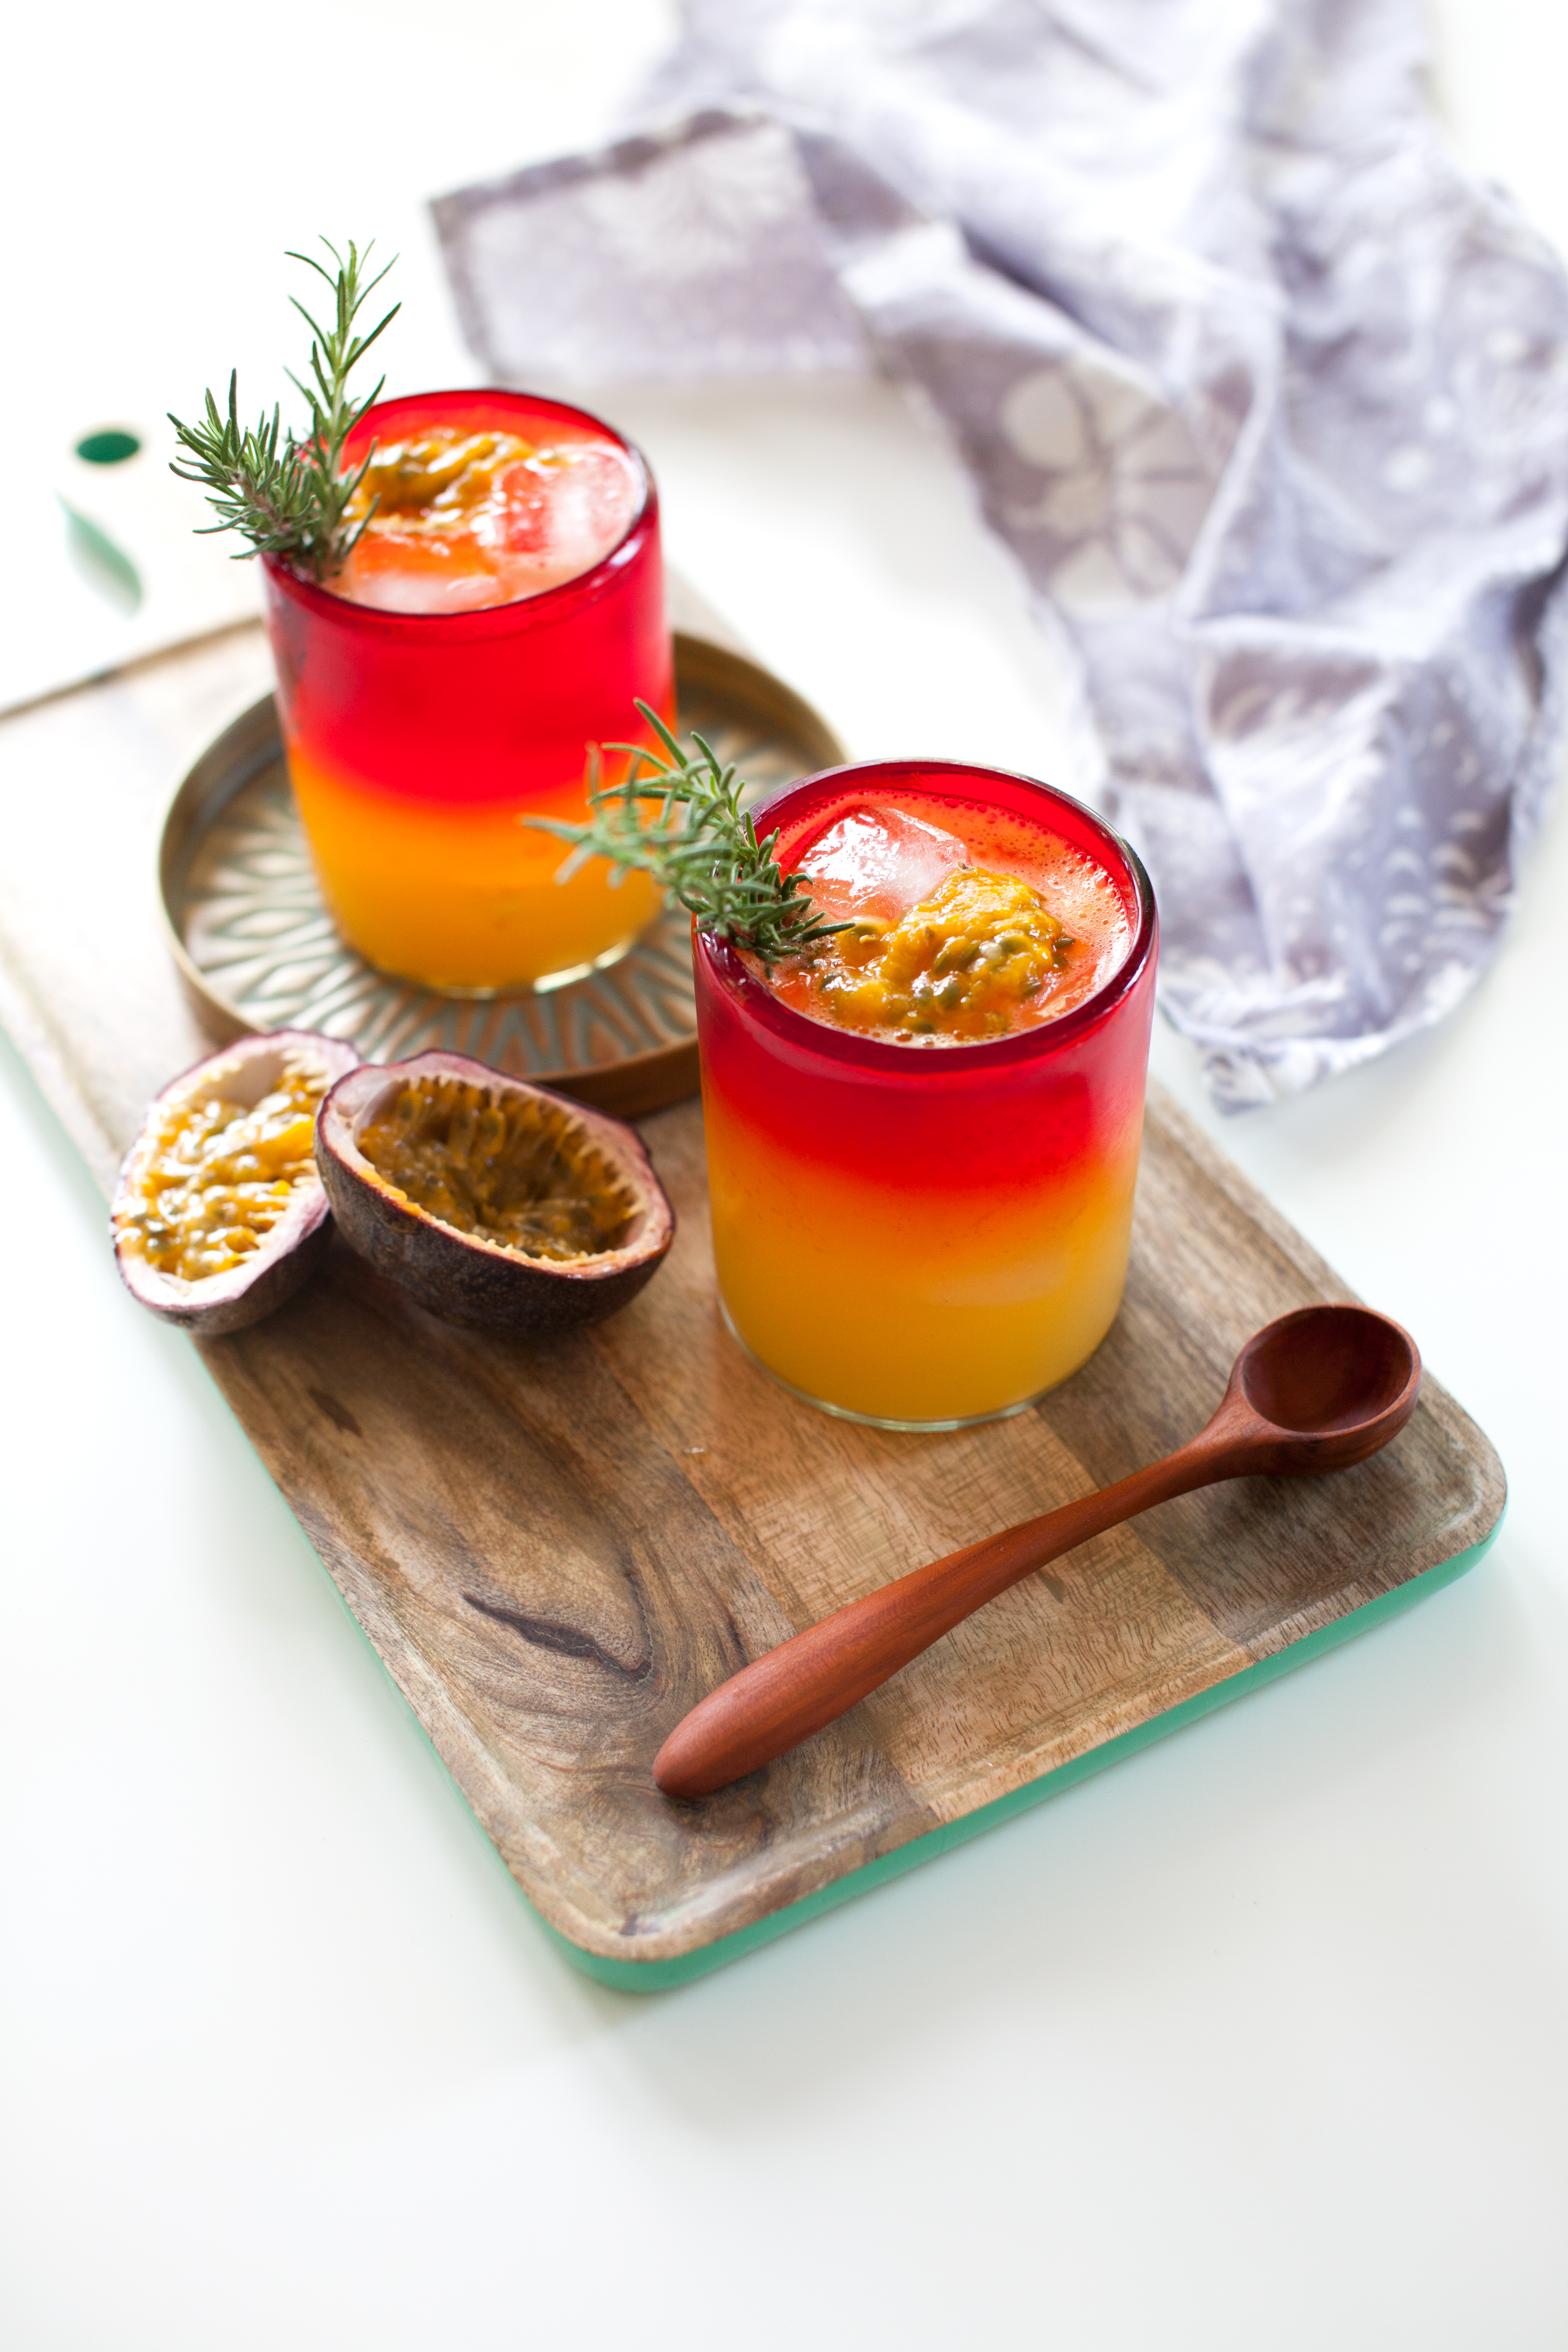 In an ice filled low ball glass add the vodka, passion fruit juice, Ginger Lime Sparkling Ice and stir. Garnish with a sprig of rosemary and a spoonful of passion fruit pulp and serve.